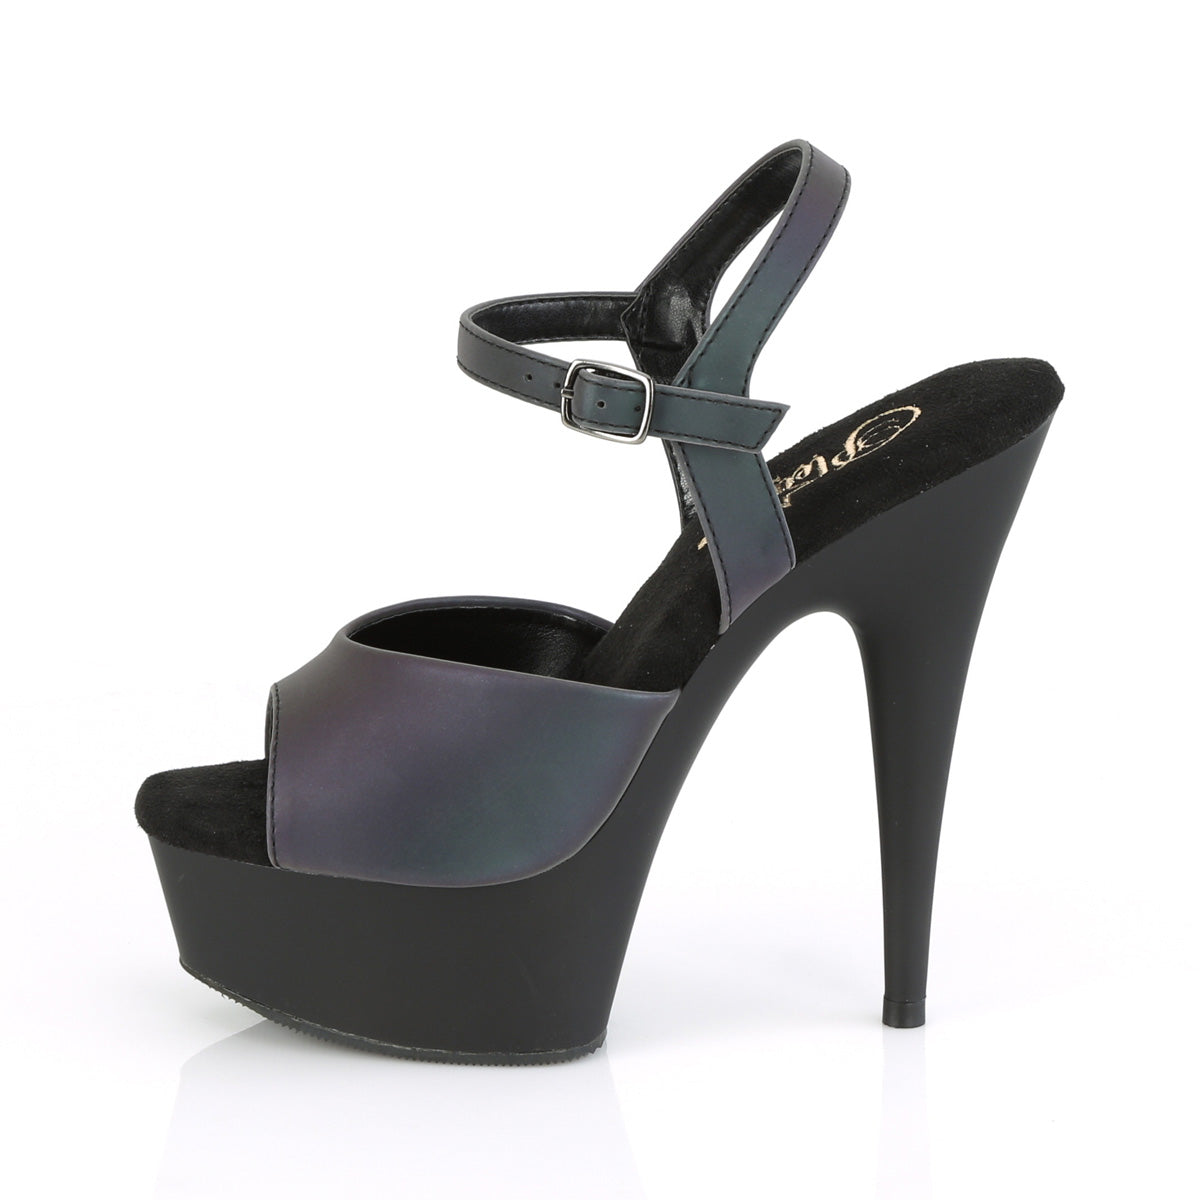 DELIGHT-609REFL Pleaser Pole Dancing Shoes 6 Inch Inch Heel Pleasers - Sexy Shoes Pole Dance Heels